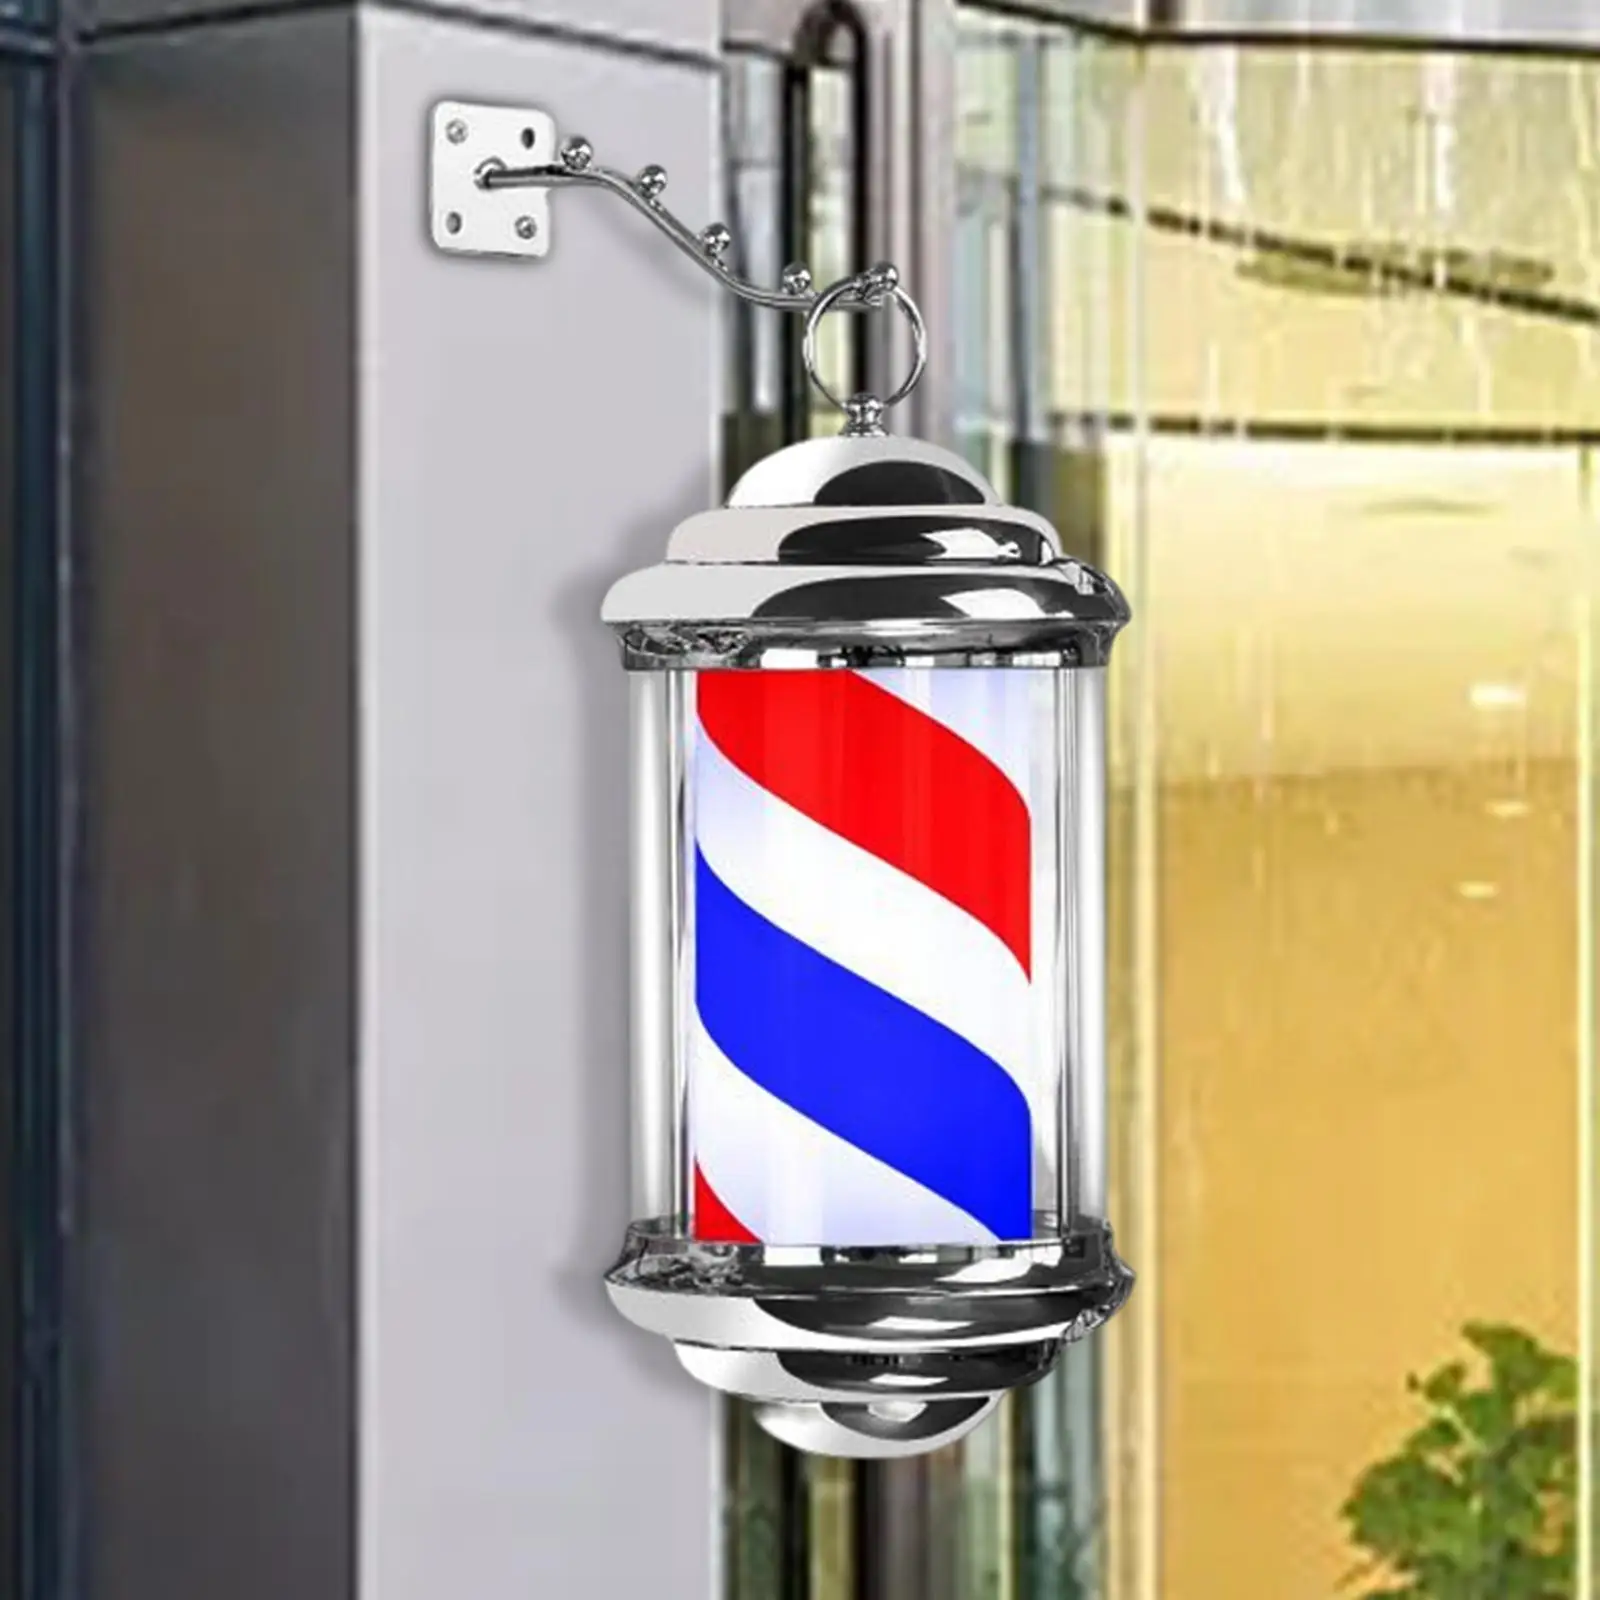 Barber Shop Pole Light Stripe Rotating Hair Salon Shop Open Signs Wall Mount with Hanging Rack LED Light for Street Indoor Party